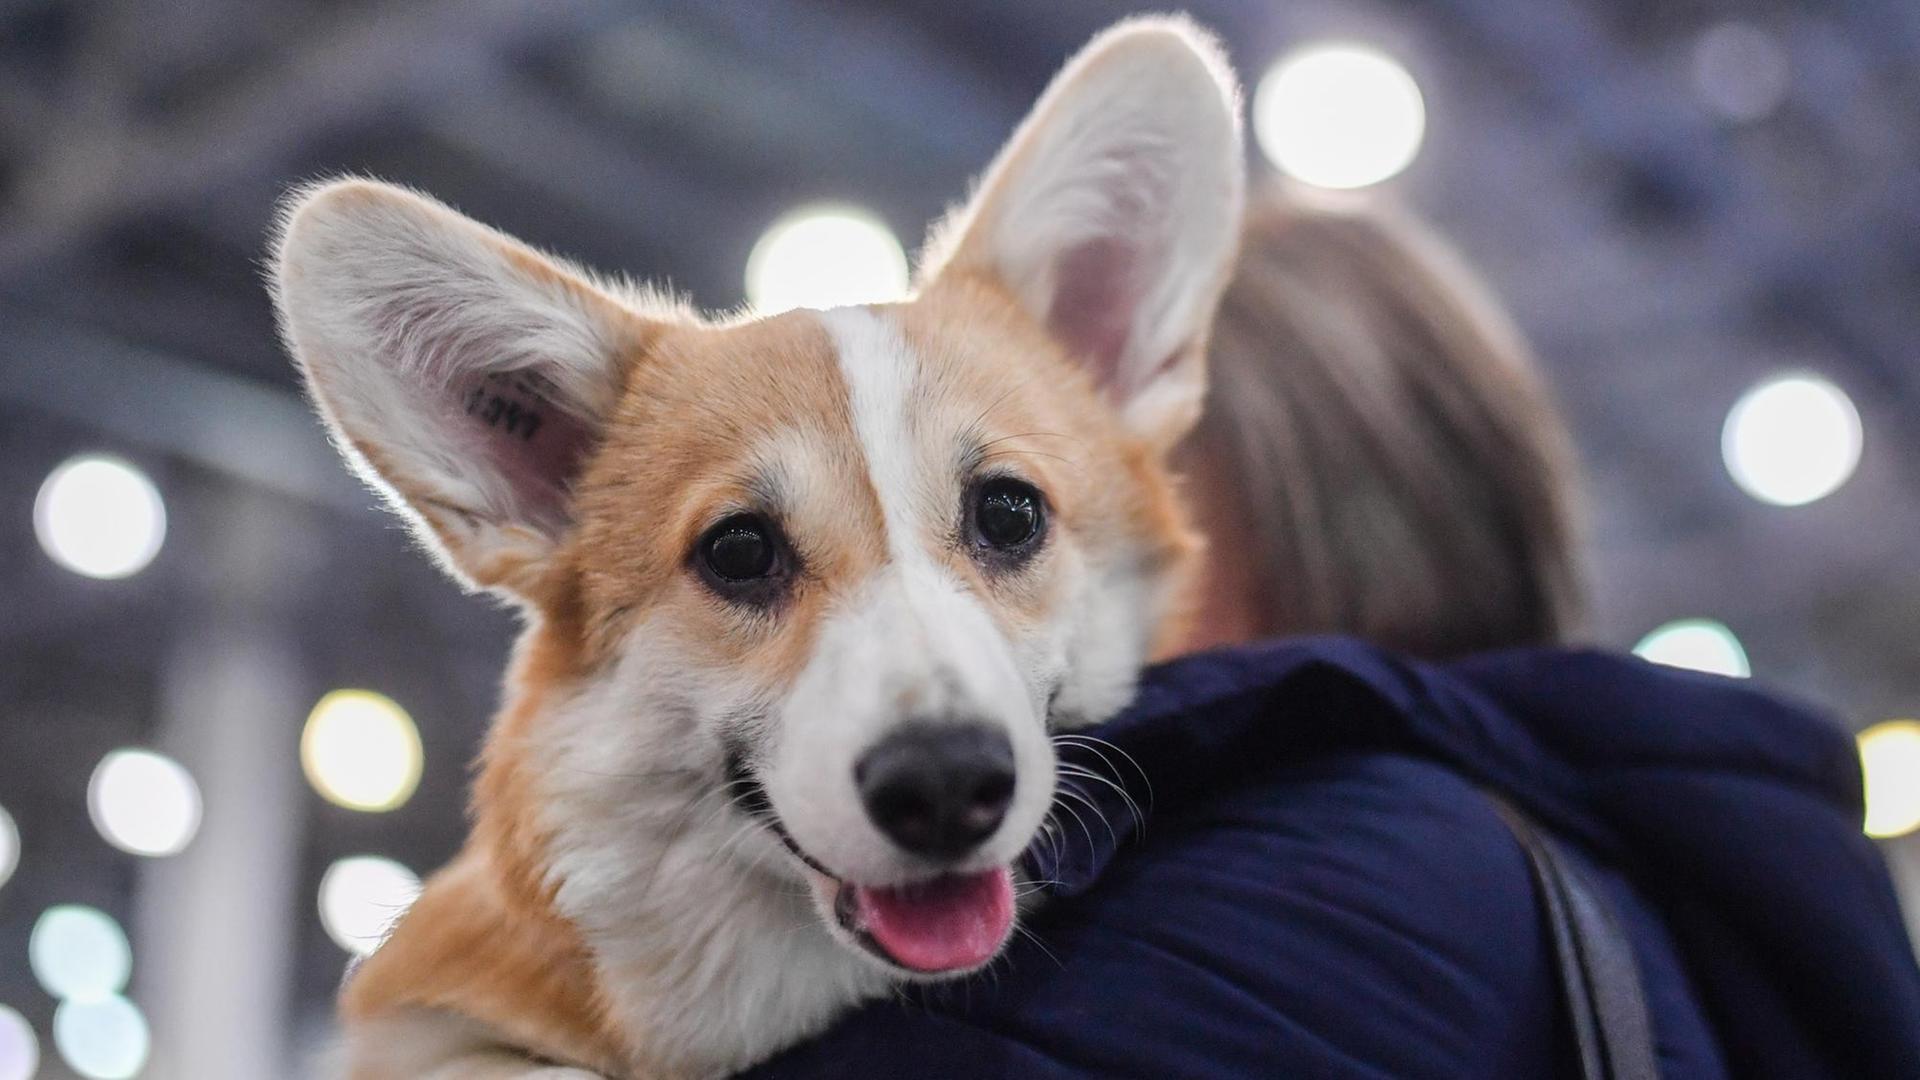 23.02.2019, Russland, Moskau: 5792834 23.02.2019 A woman holds her Welsh Corgi dog at a dog show, in Moscow, Russia. Evgenya Novozhenina / Sputnik Foto: Evgenya Novozhenina/Sputnik/dpa |